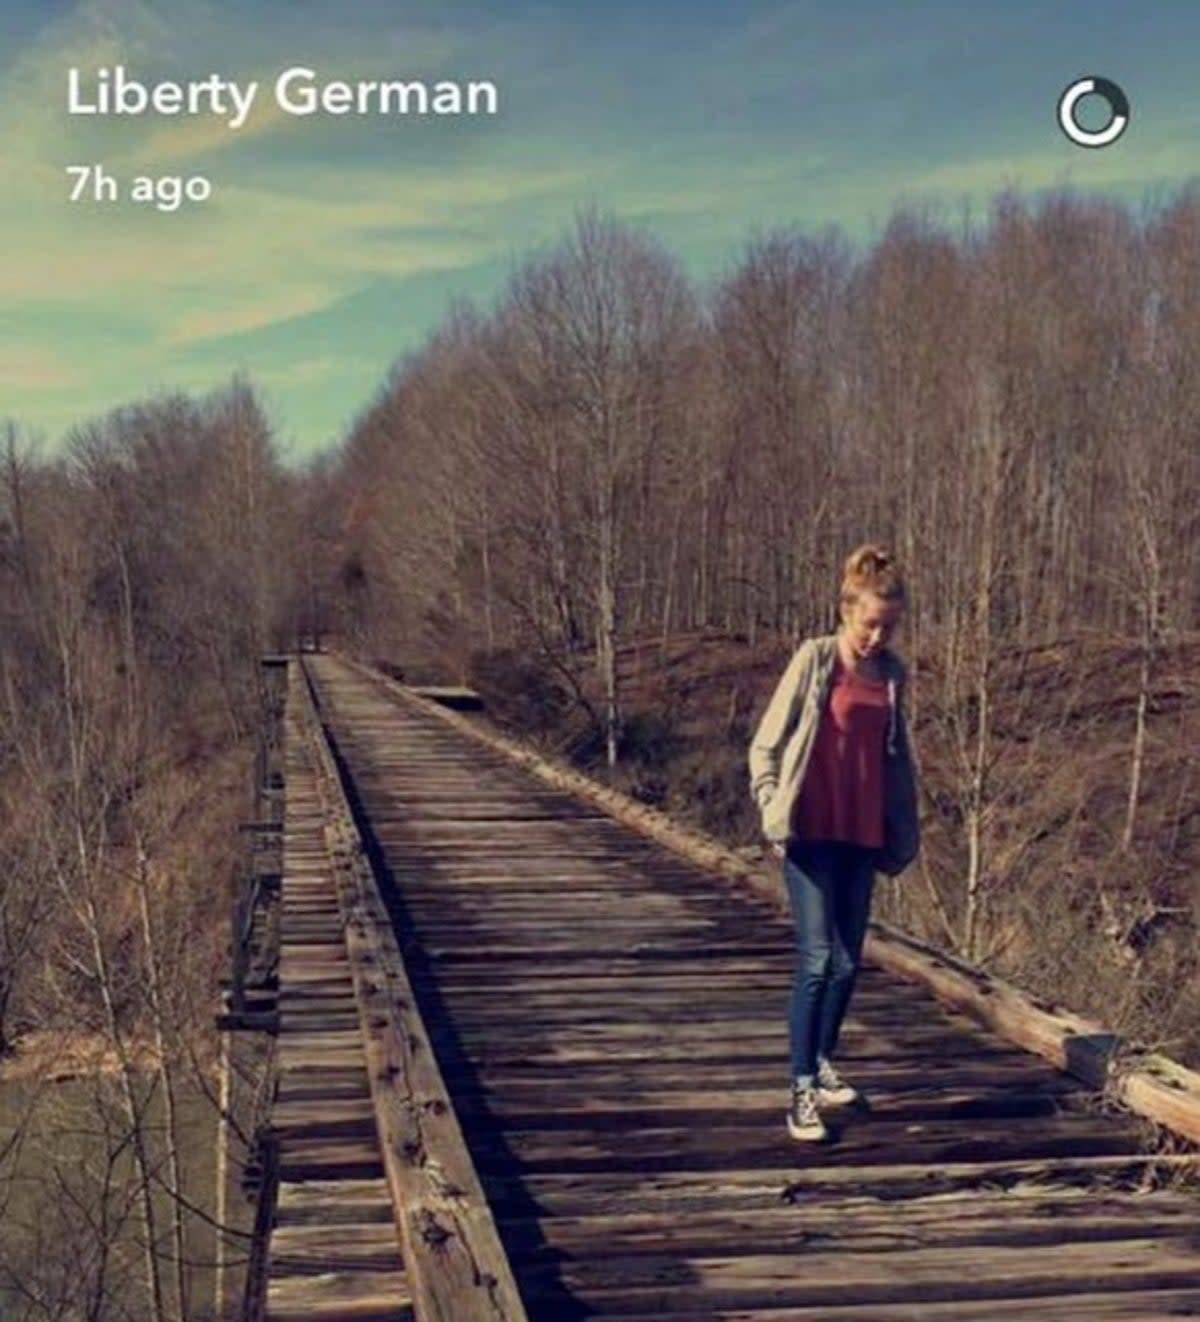 Libby German posted a Snapchat as the girls walked along the trail (Snapchat)